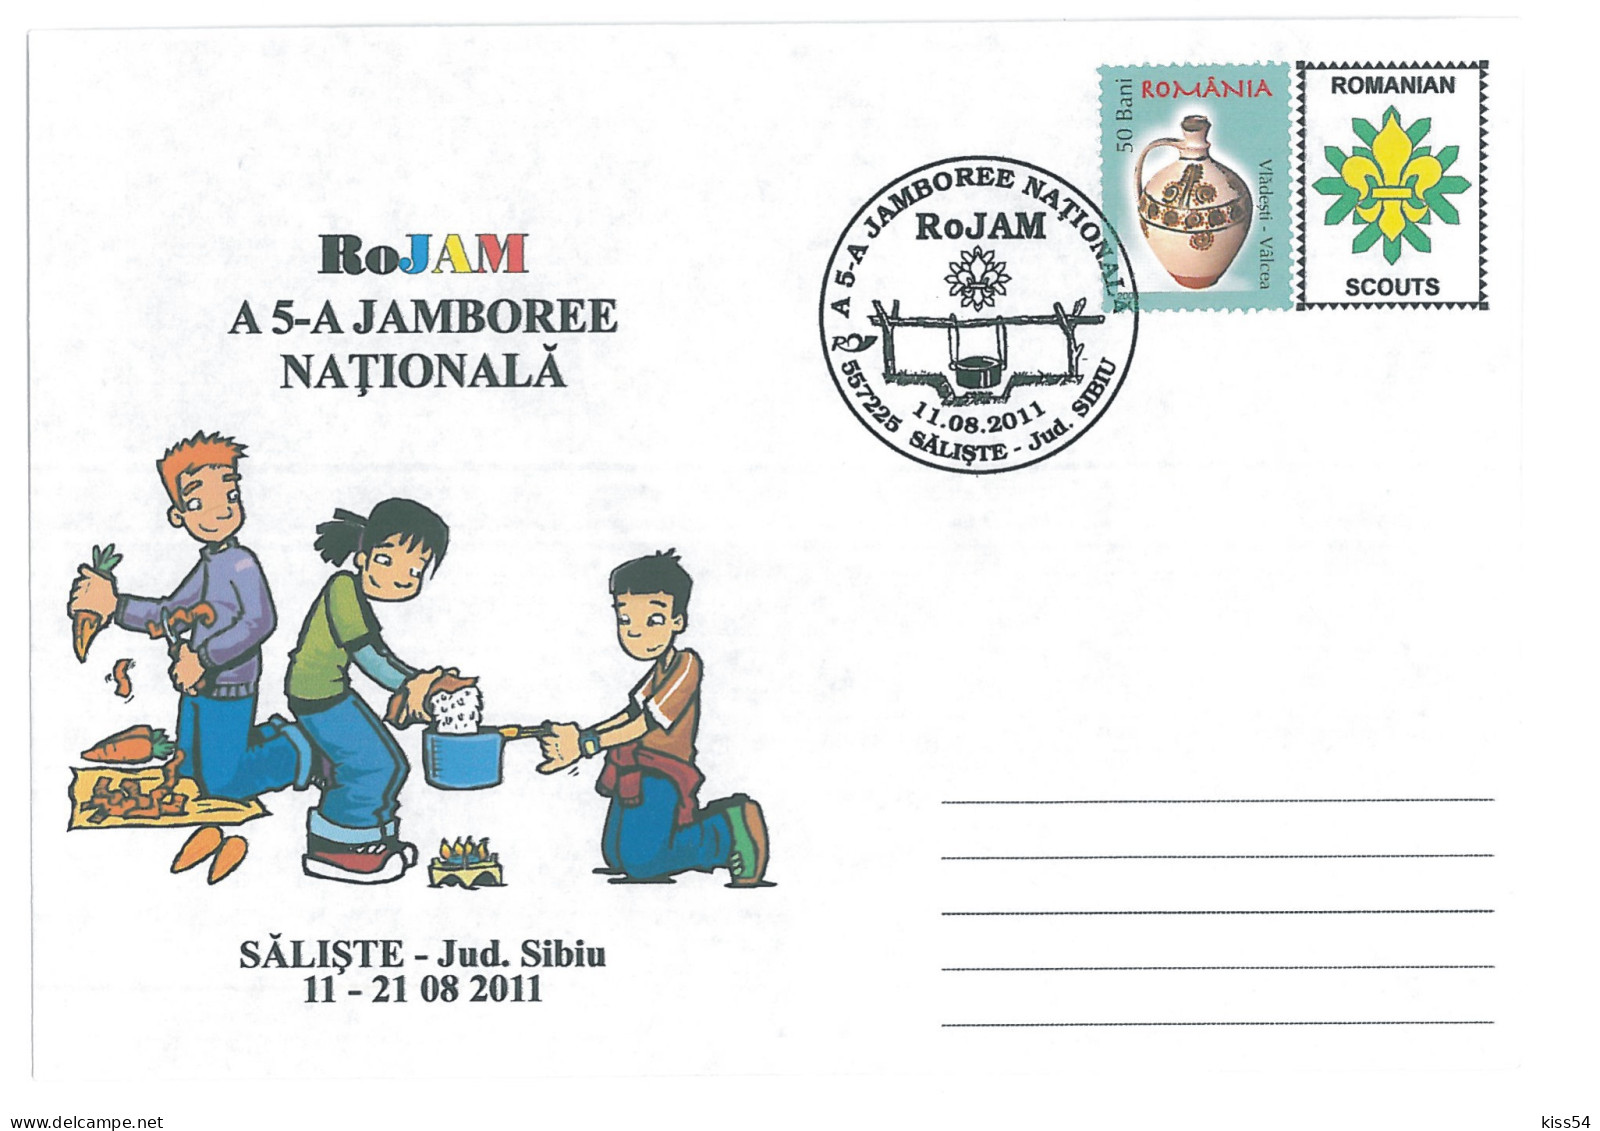 SC 47 - 1298 ROMANIA, National JAMBOREE, Scout - Cover - Used - 2011 - Lettres & Documents